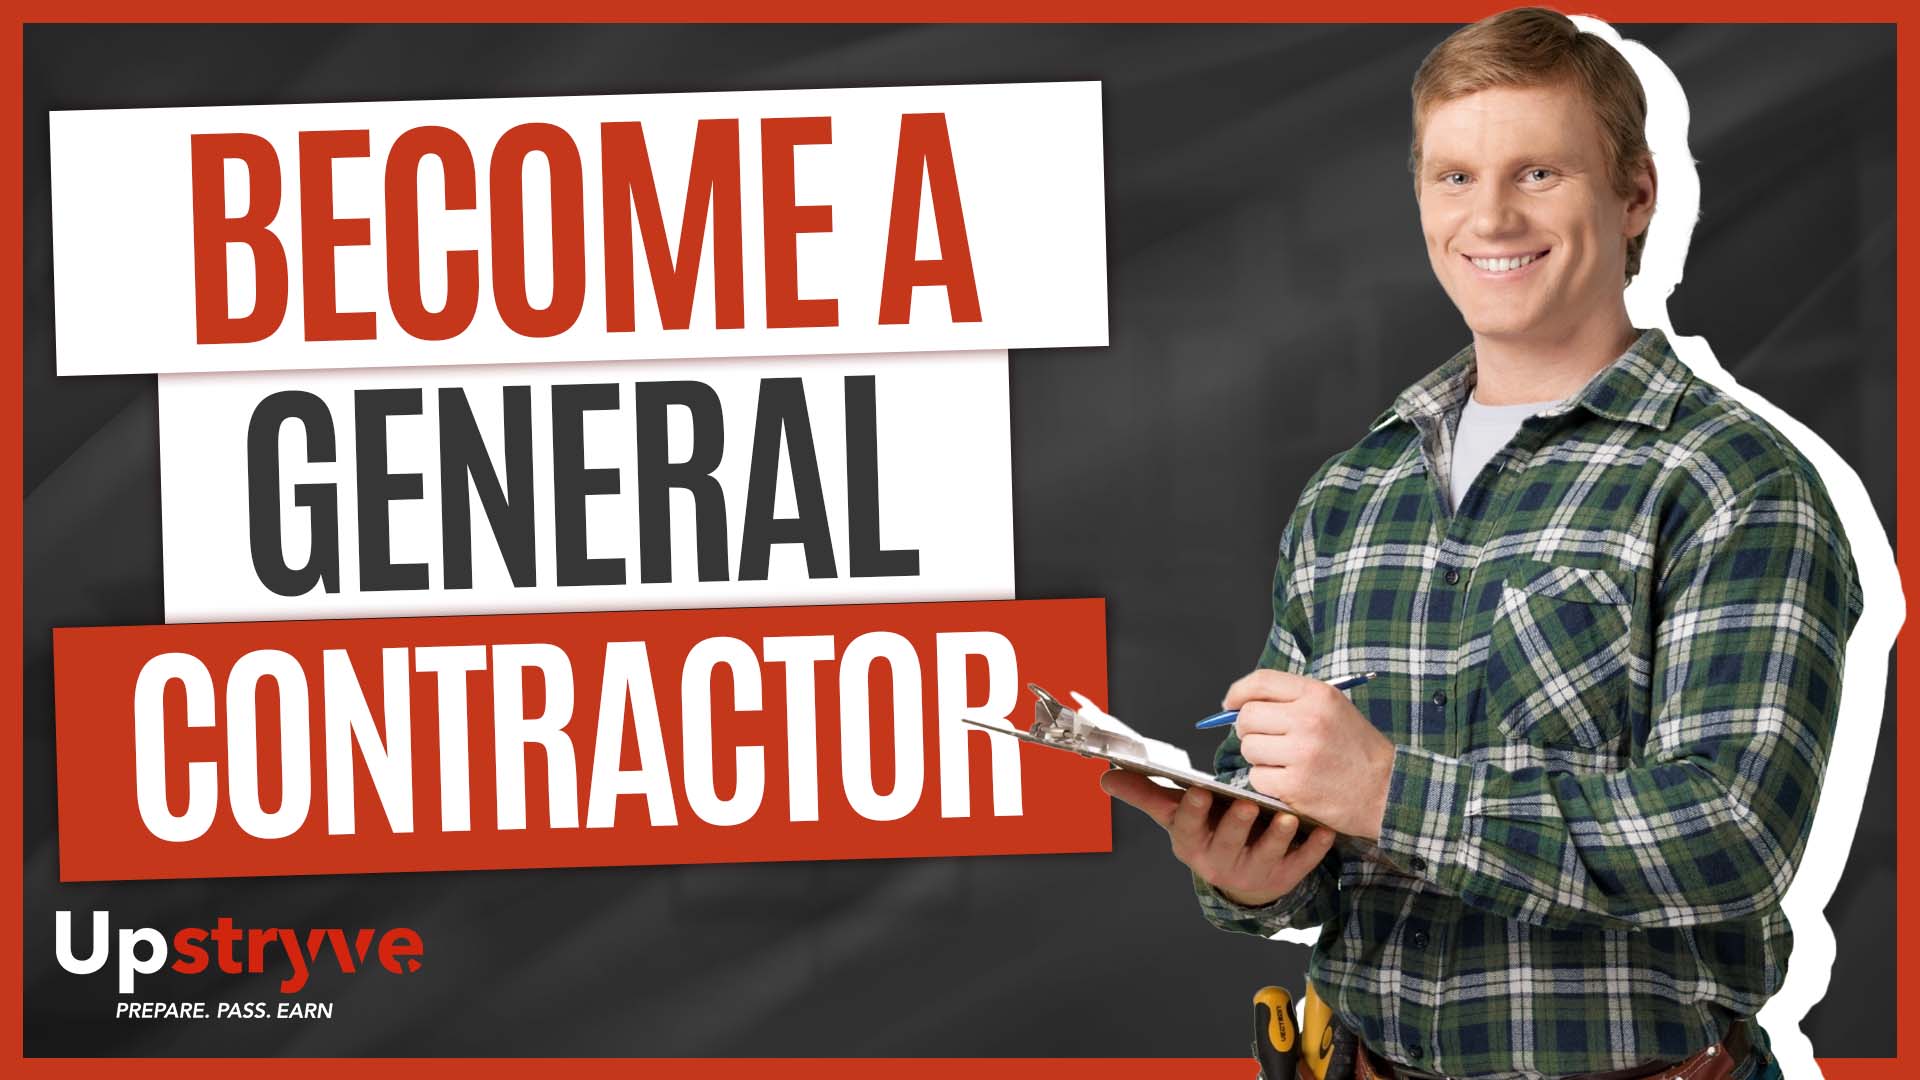 How To Become A General Contractor ? Call us today: 877-938-1888. Today we will discuss how to become a general contractor. Becoming a general contractor can take a few years of experience as well as passing specific exams to obtain your license. Becoming a general contractor differs state to state so it is important you know your state laws and requirements before starting your journey. General contractors make on average $50,000 to $90,000 dollars per year so if you have the experience required you should definitely consider it. Upstryve provides all the resources you need to effectively obtain your general contractor license. We offer 1on 1 tutoring , book rentals, online courses and free webinars.